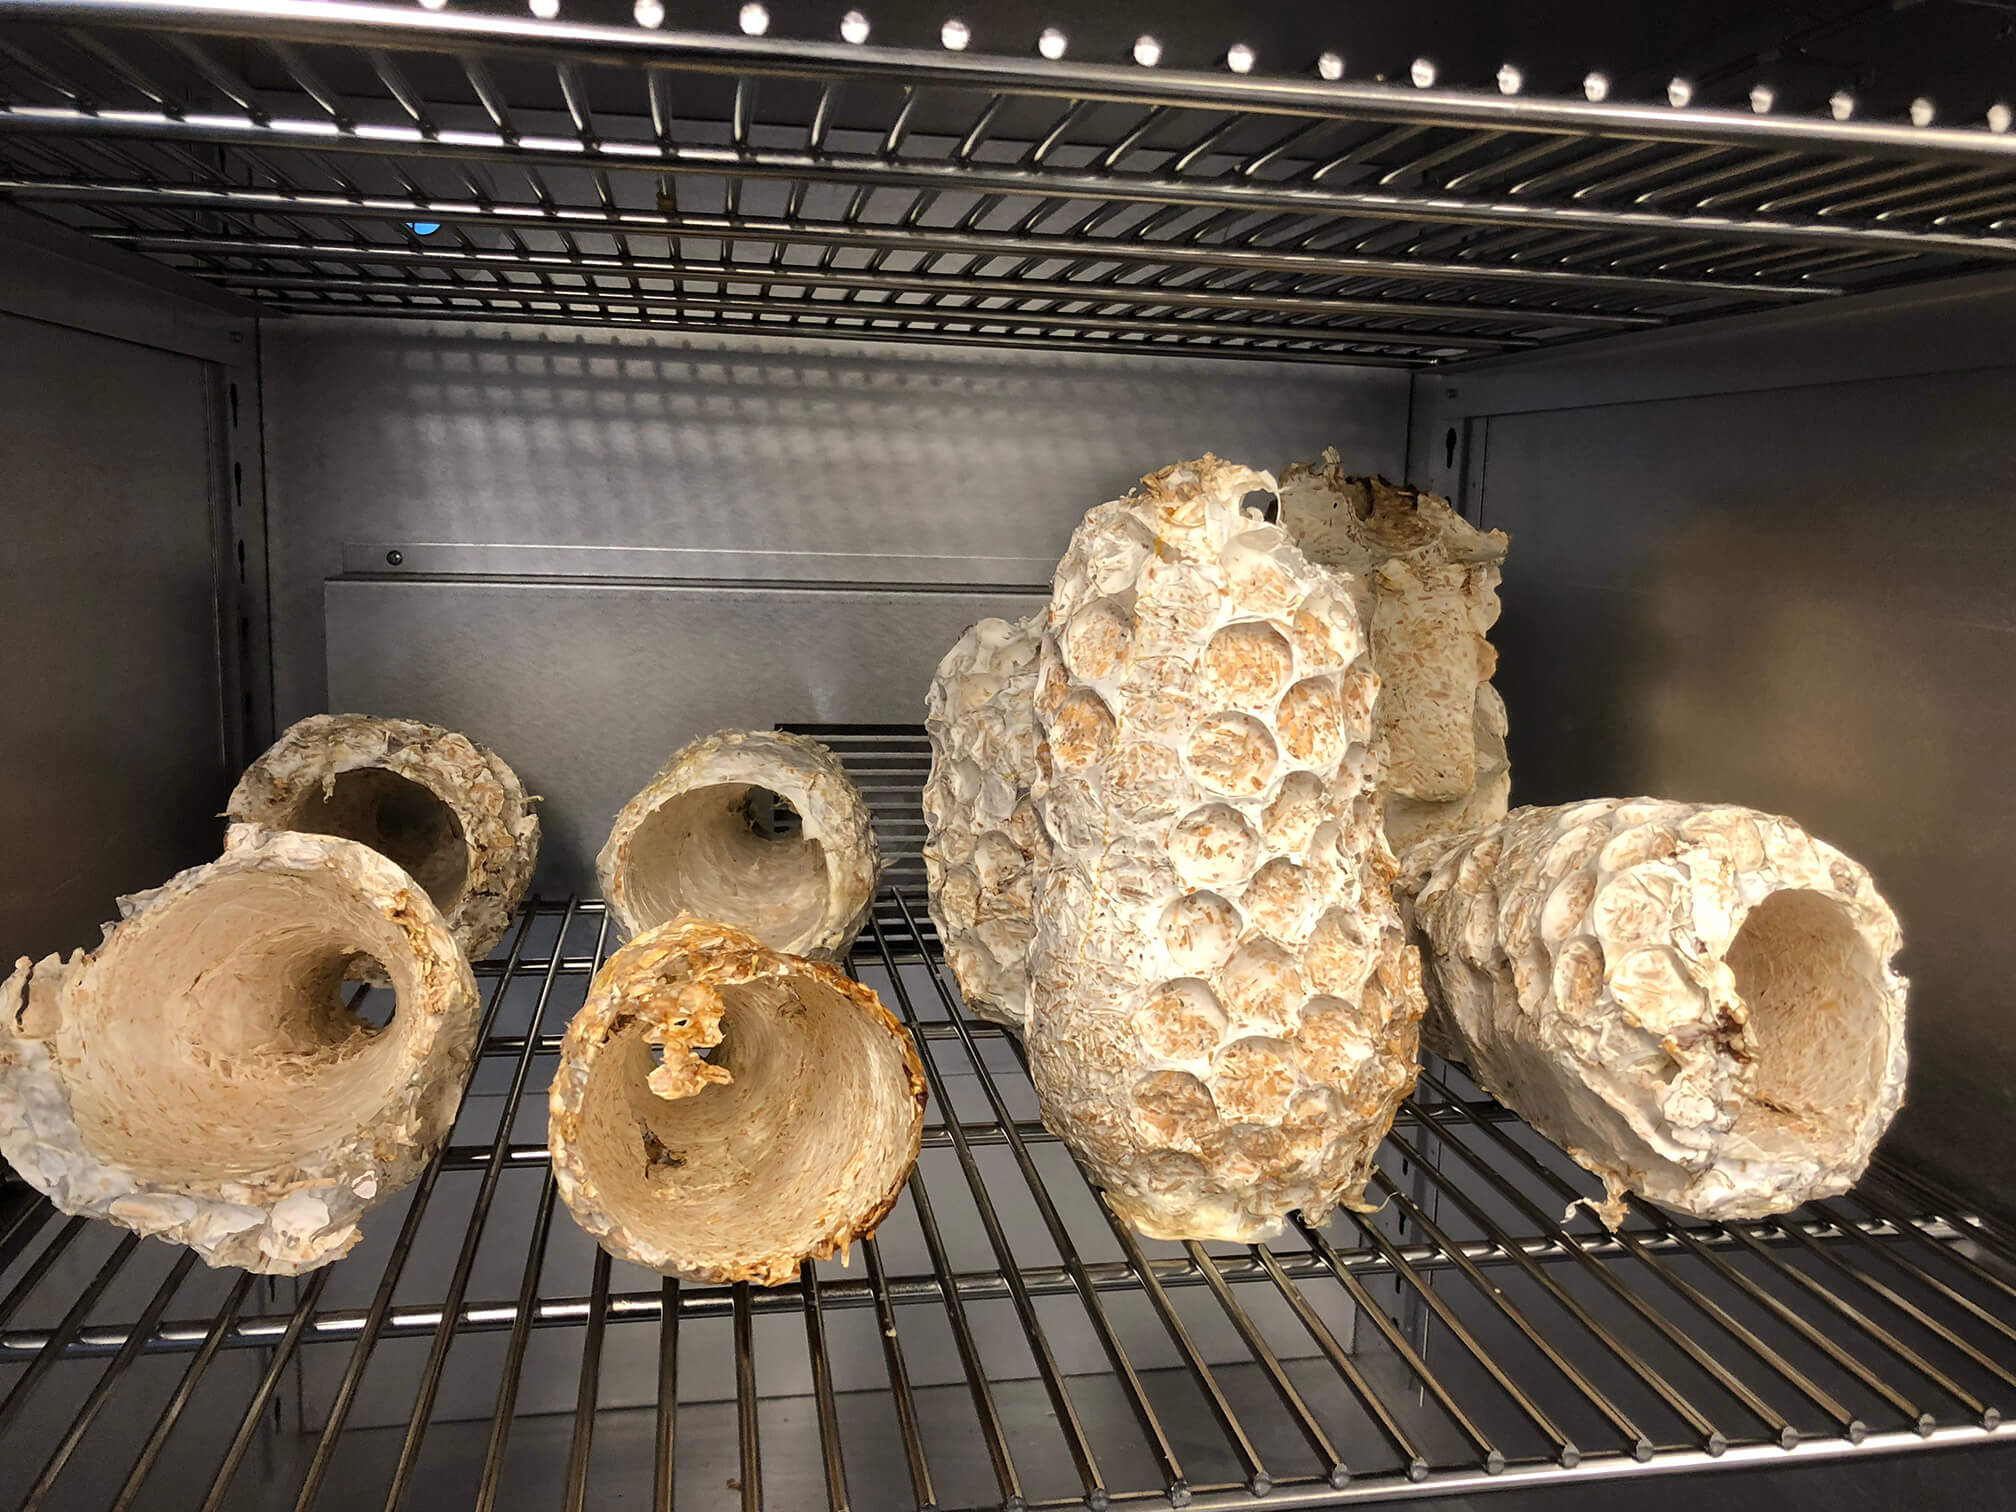 Mycelium lampshades in the curing oven